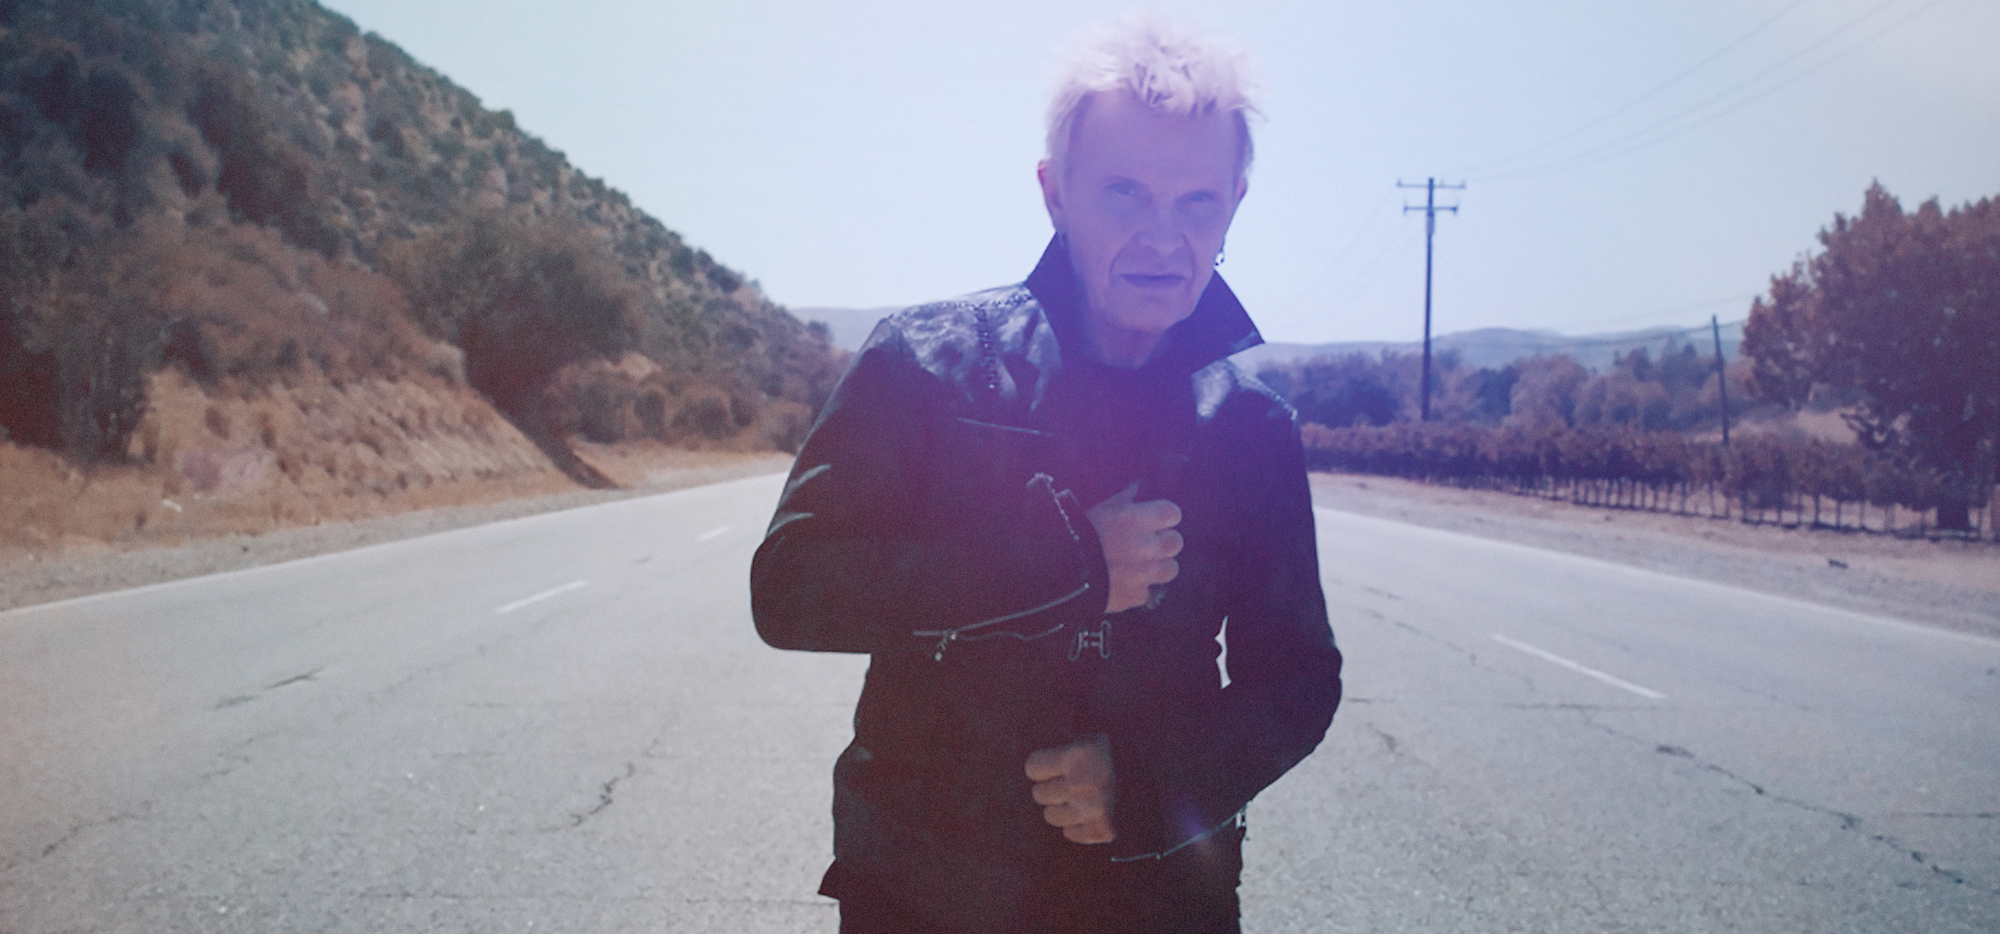 Billy Idol Returns with Upcoming EP ‘The Roadside,’ Shares “Bitter Taste”